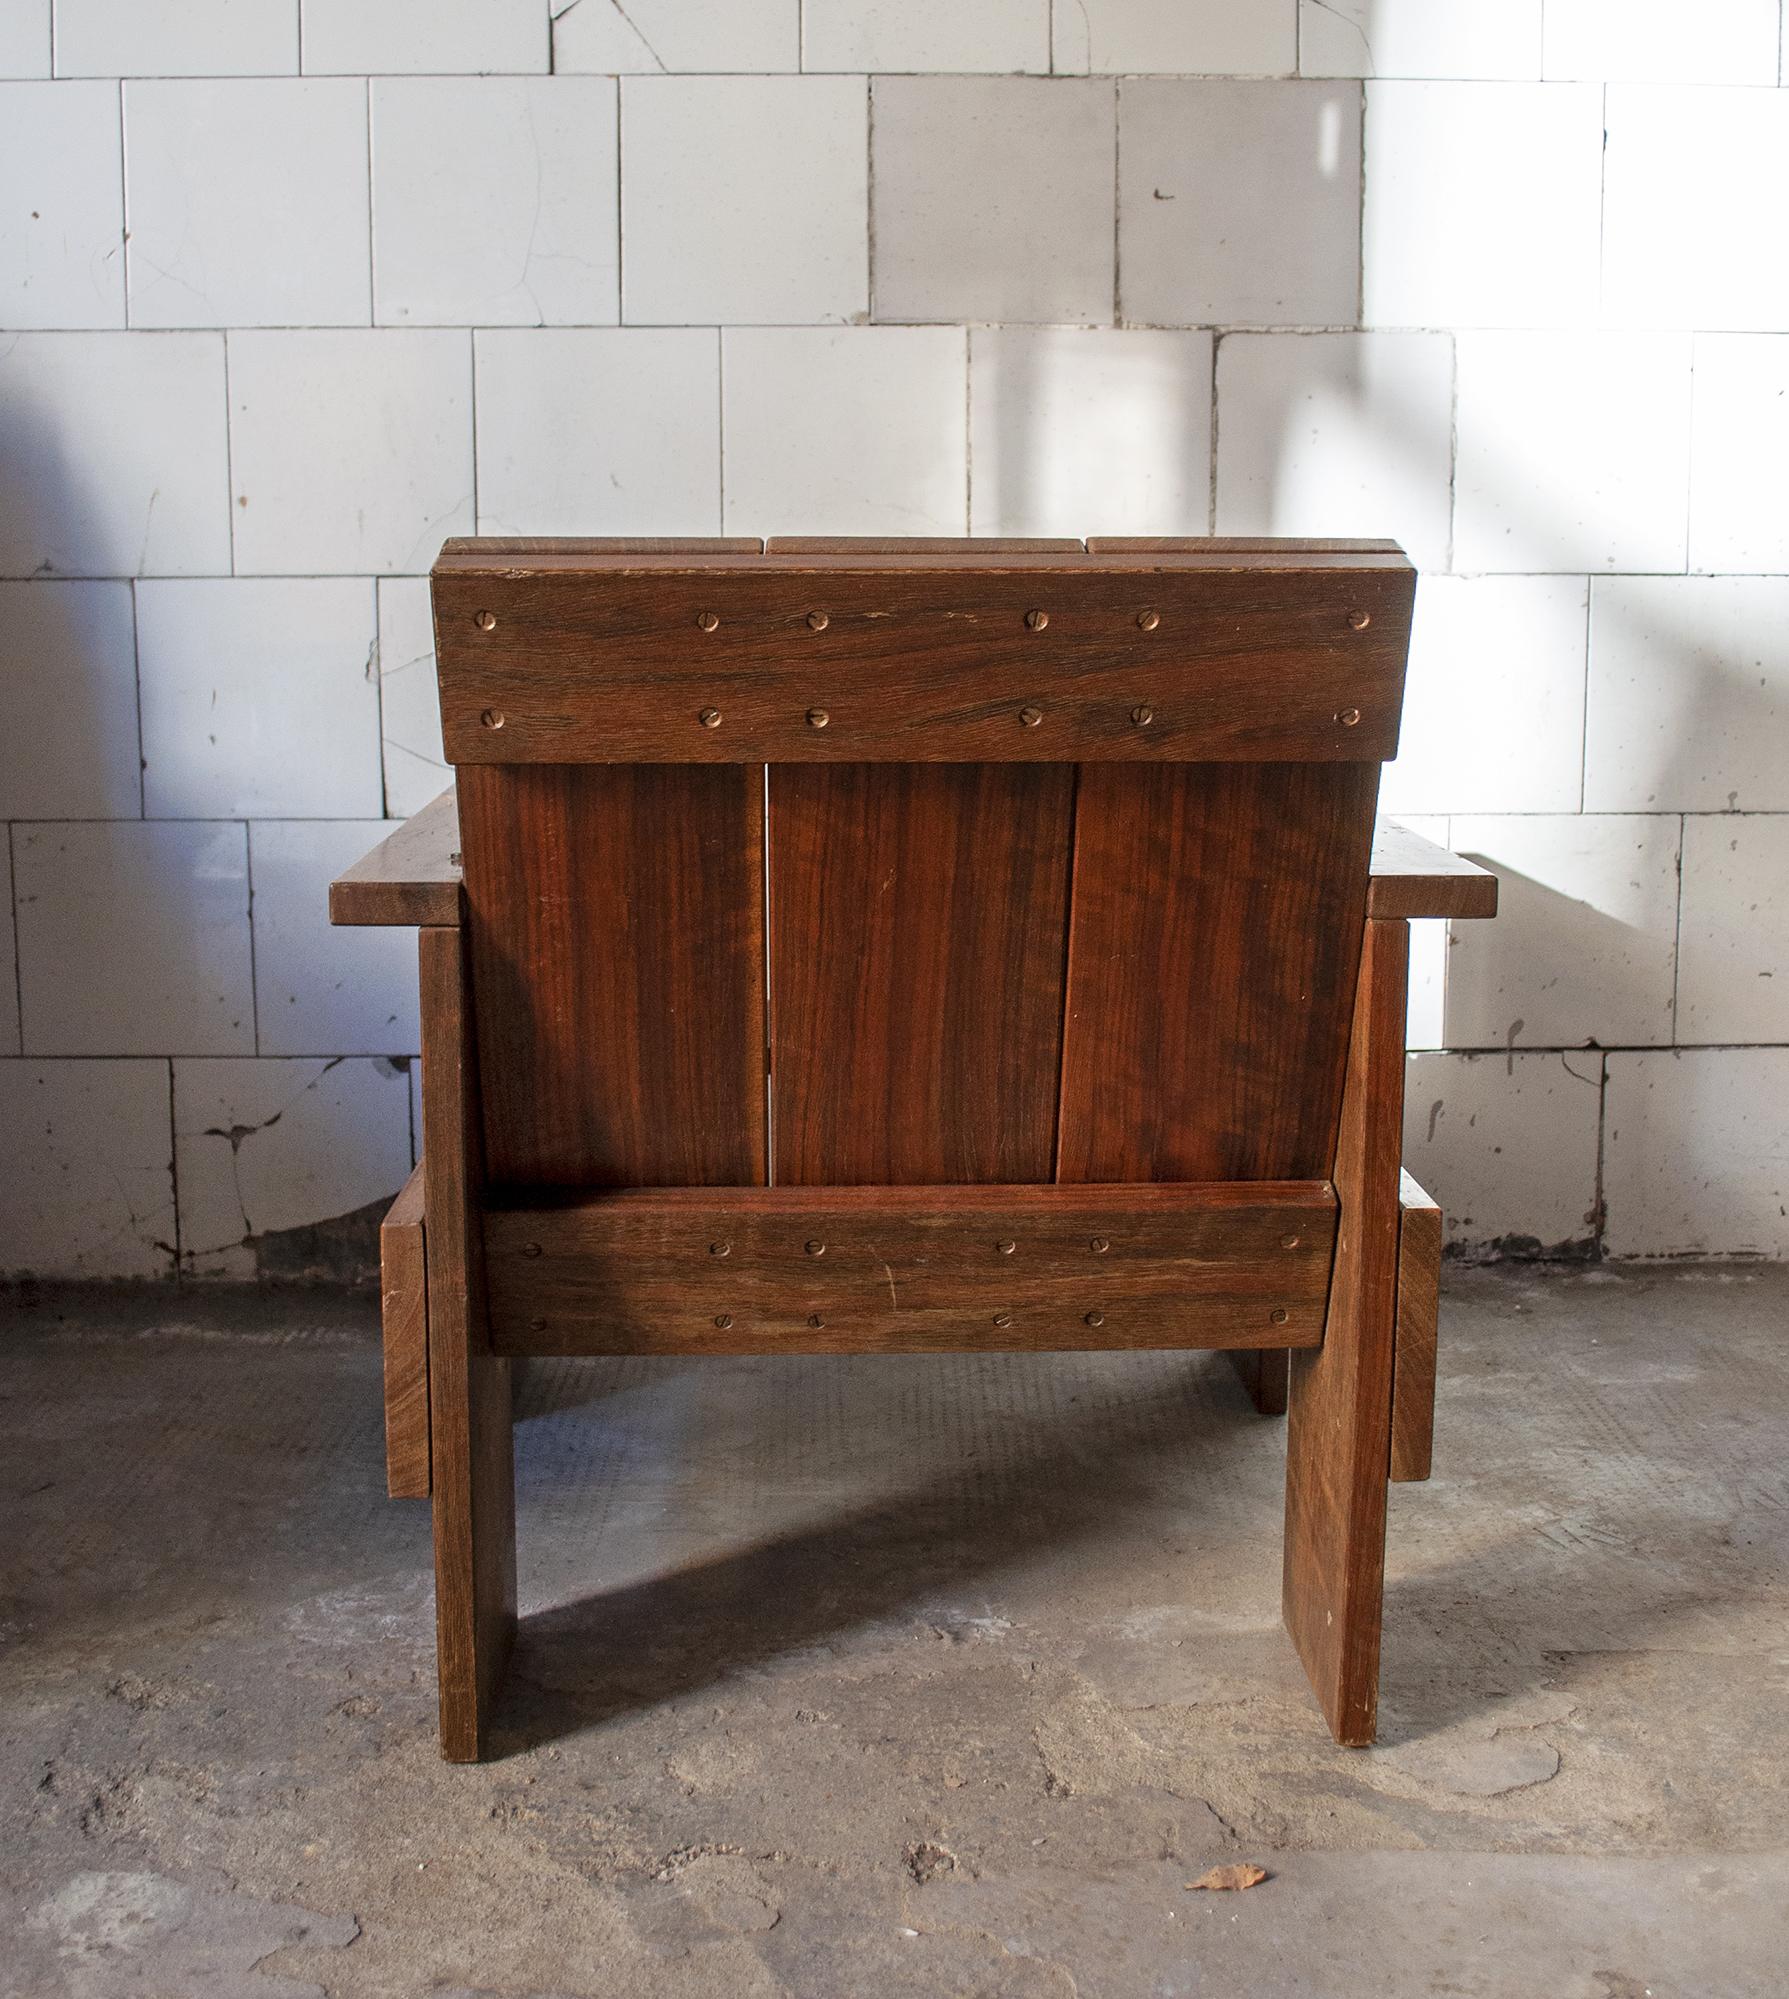 Mid-20th Century Rosewood Armchair with Brass Screws, Inspired by Gerrit Rietveld Bauhaus, 1950s For Sale